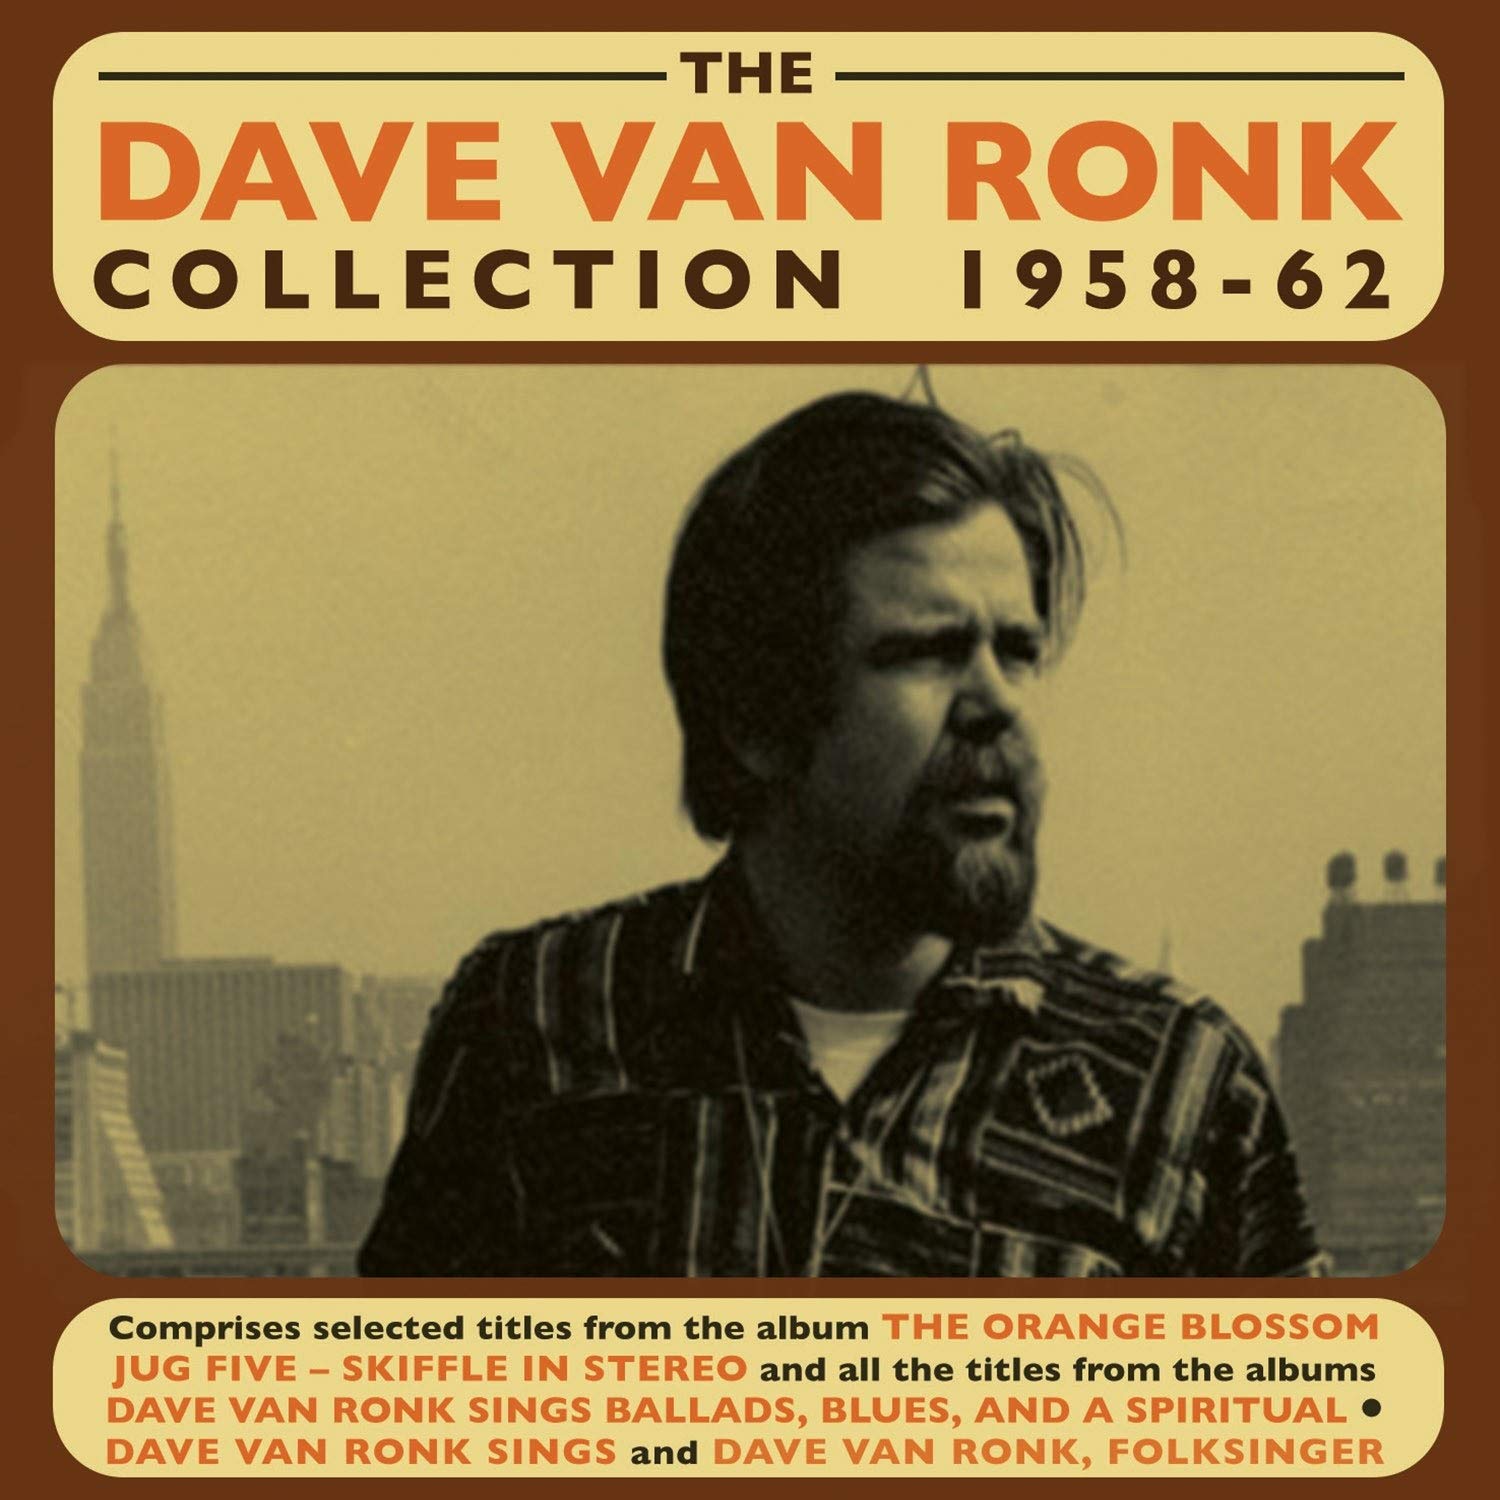 The Dave Van Ronk Collection 1959-62